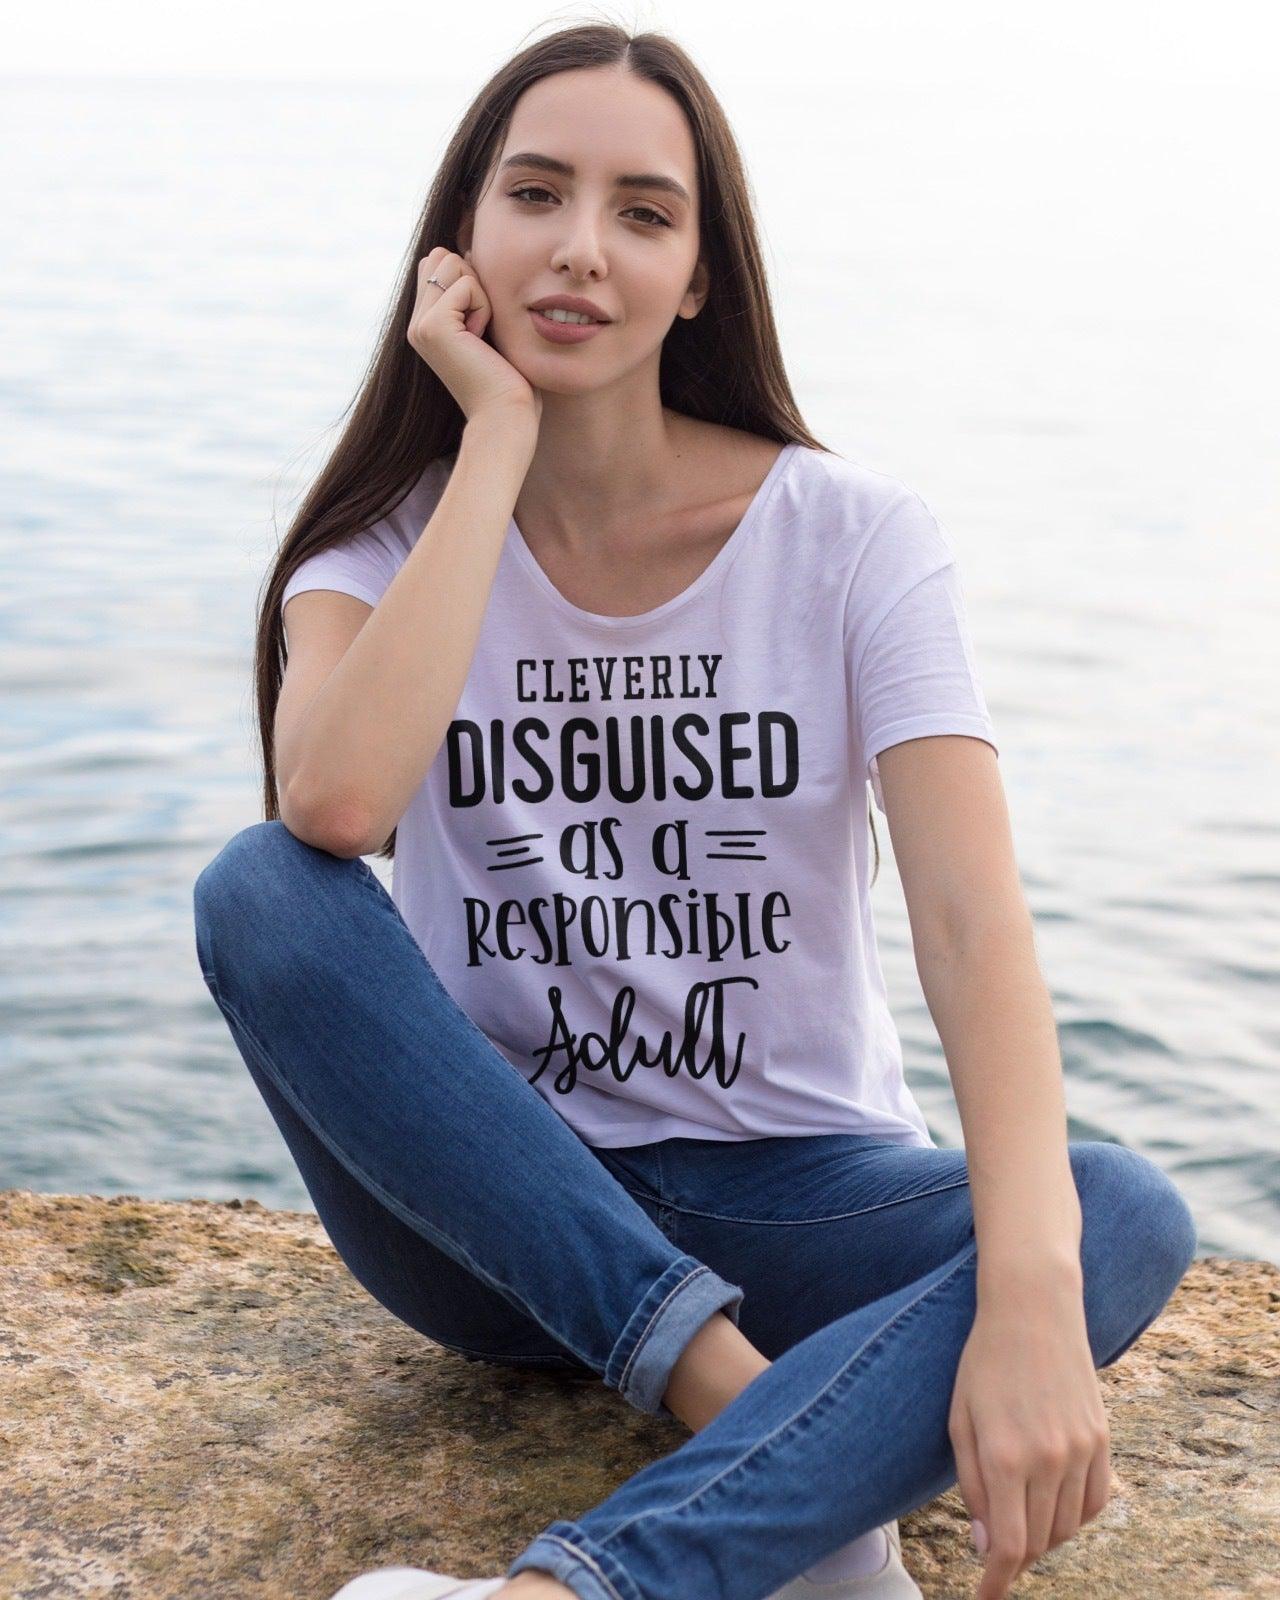 Women’s Boyfriend T-shirt-Cleverly Disguised as an Adult - Elementologie